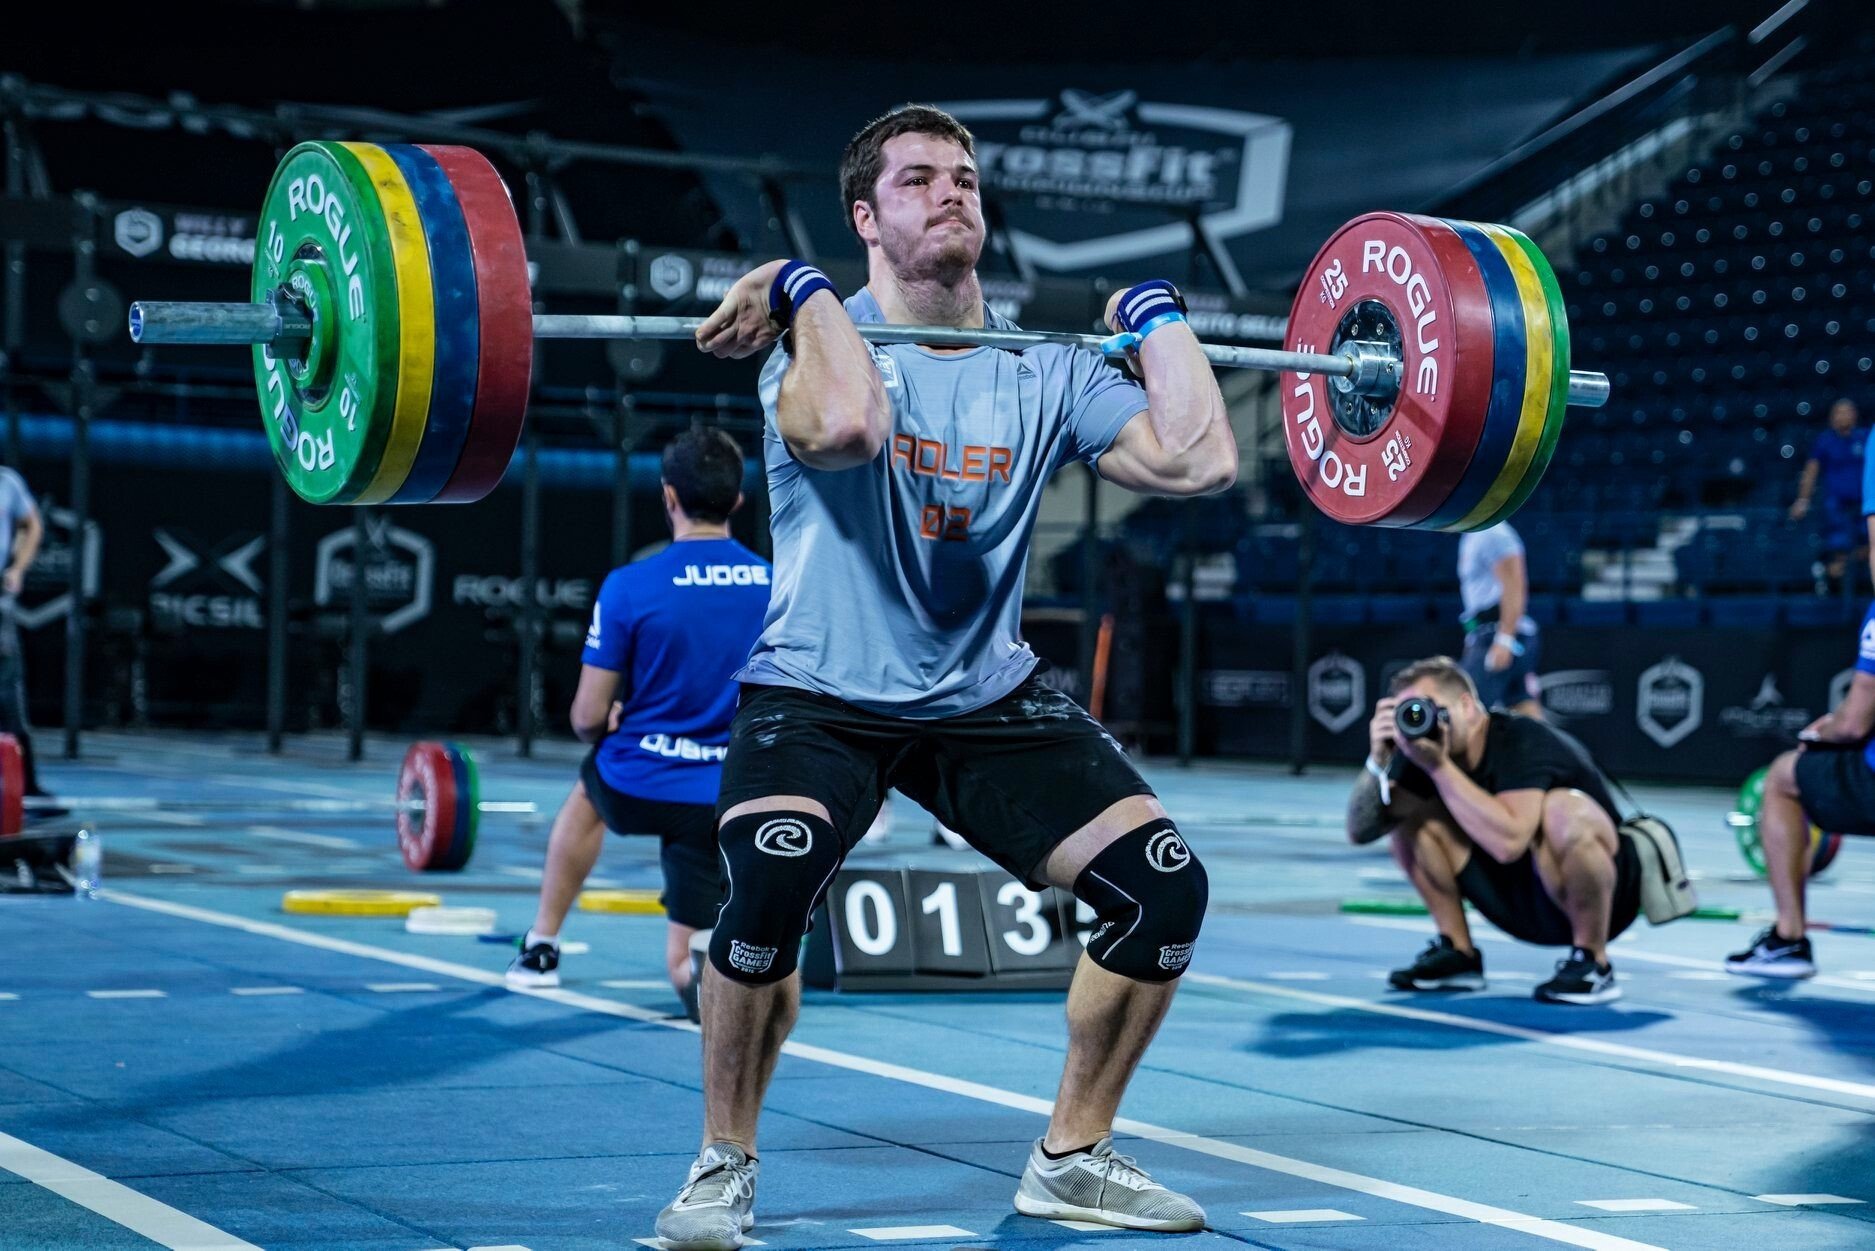 Jeffrey Adler will now be one of the few who heads to the 2020 CrossFit Games. Photo: Dubai CrossFit Championship